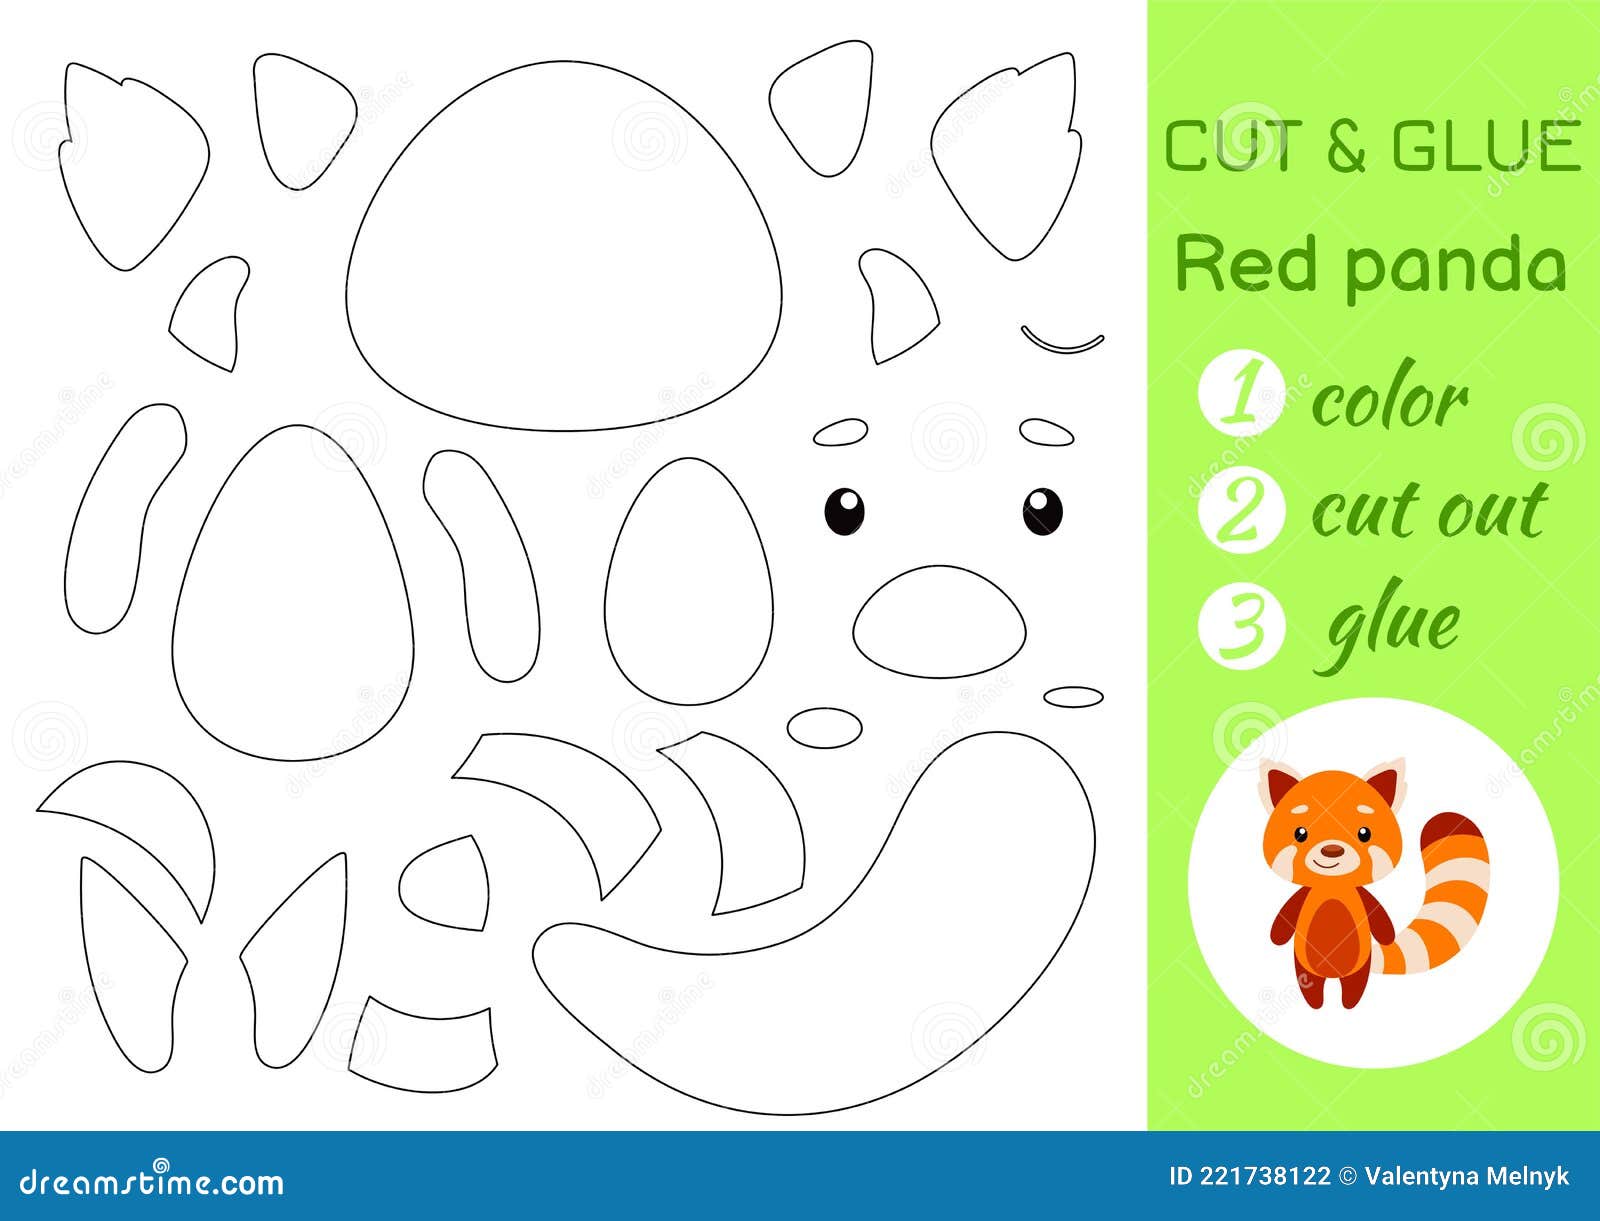 Color cut and glue paper little red panda cut and paste crafts activity page educational game for preschool children stock vector